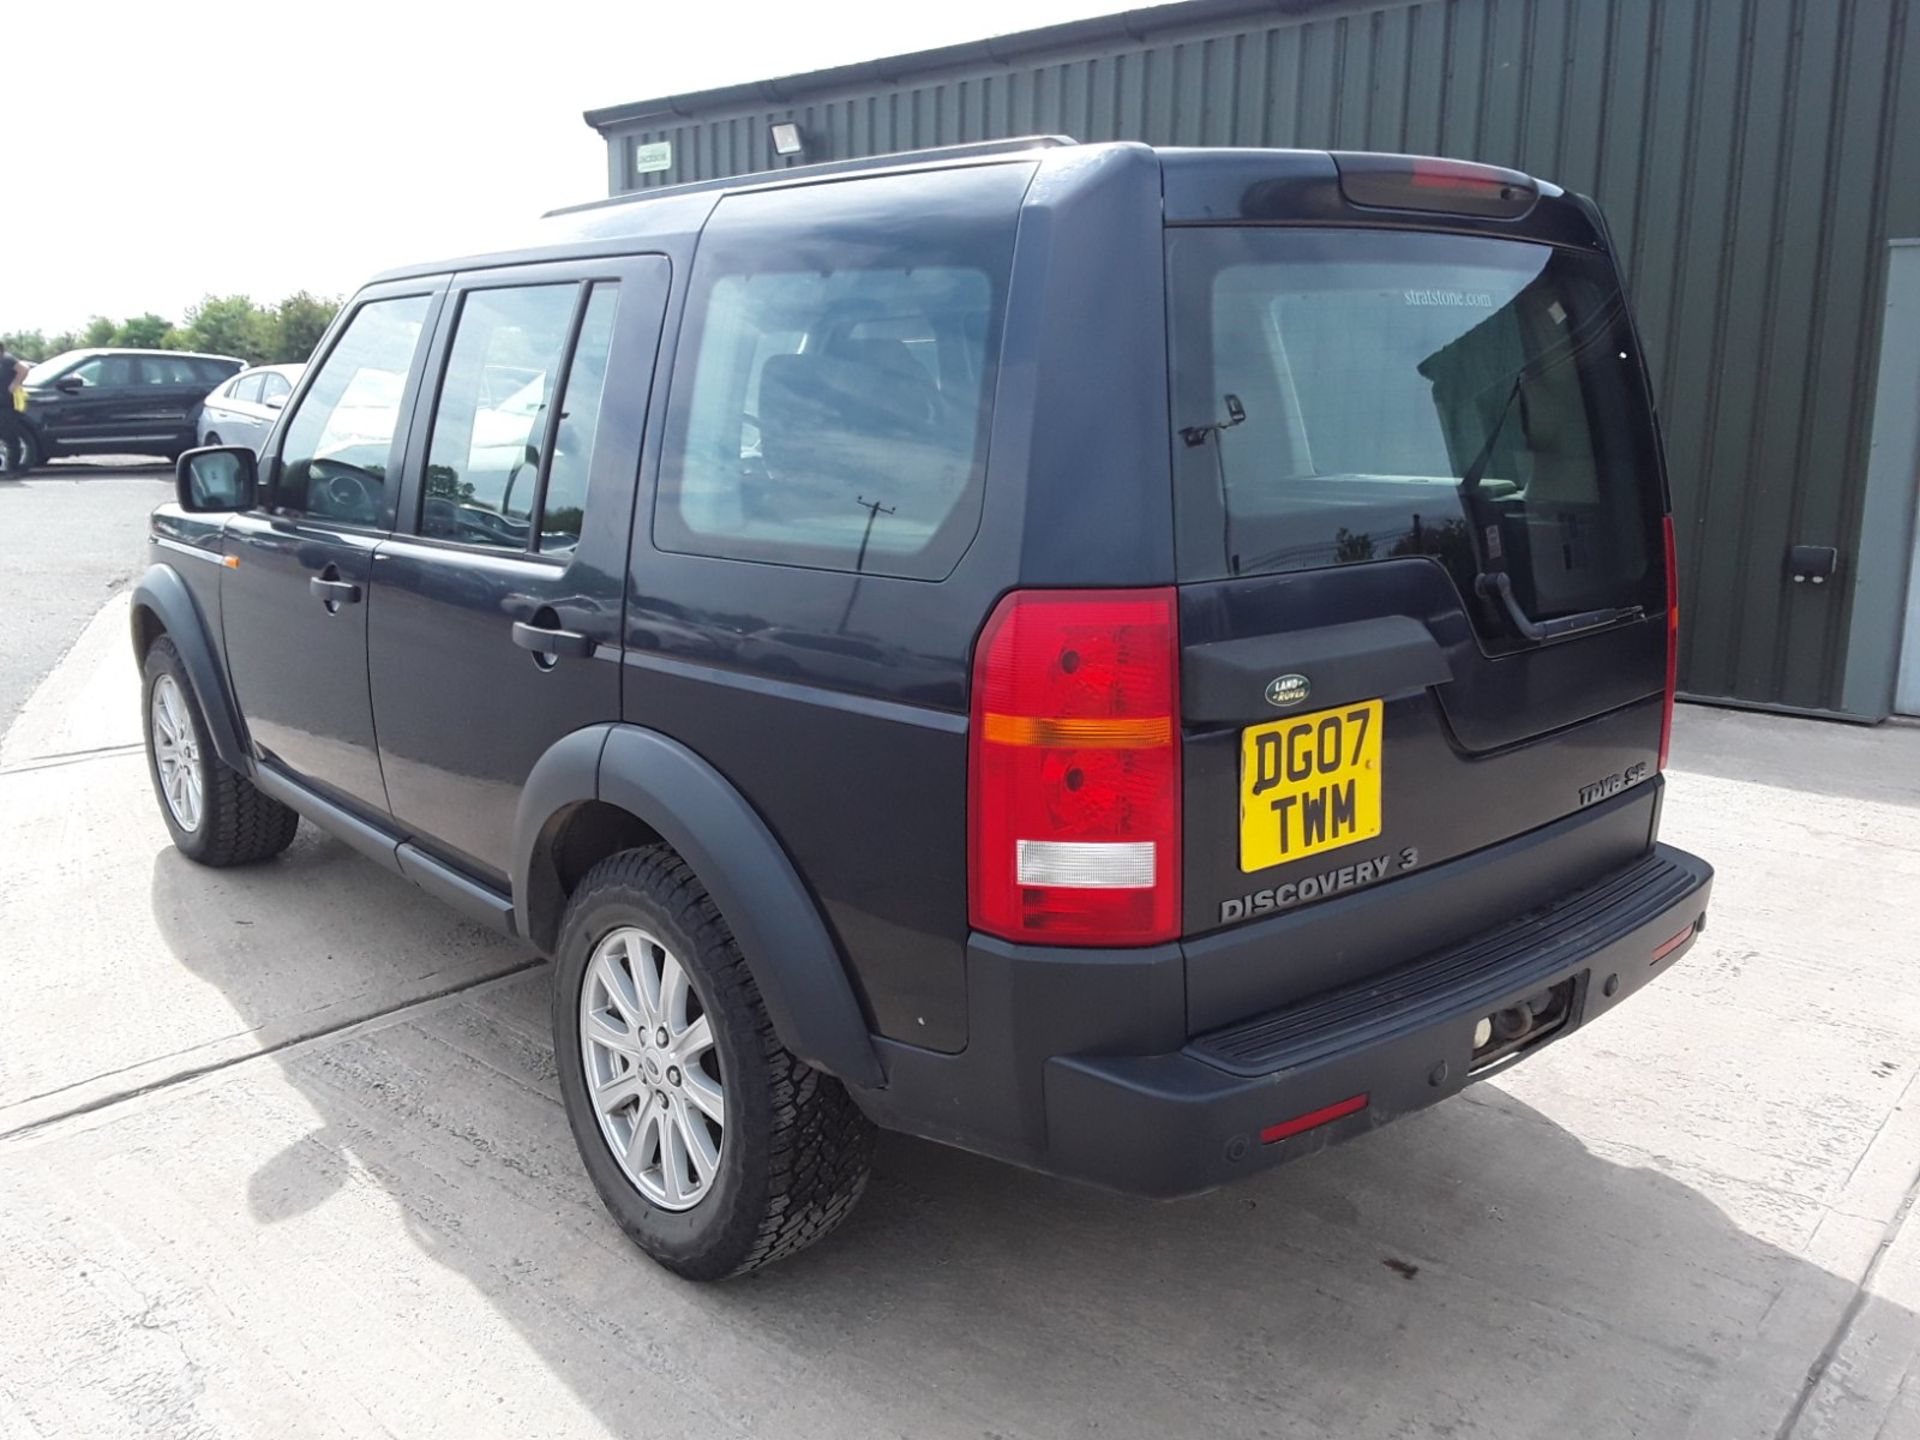 (On Sale) LAND ROVER DISCOVERY 3 *SE EDITION* 7 SEATER SUV (2007) '2.7 TDV6 - AUTO' *NAV* (NO VAT) - Image 2 of 2